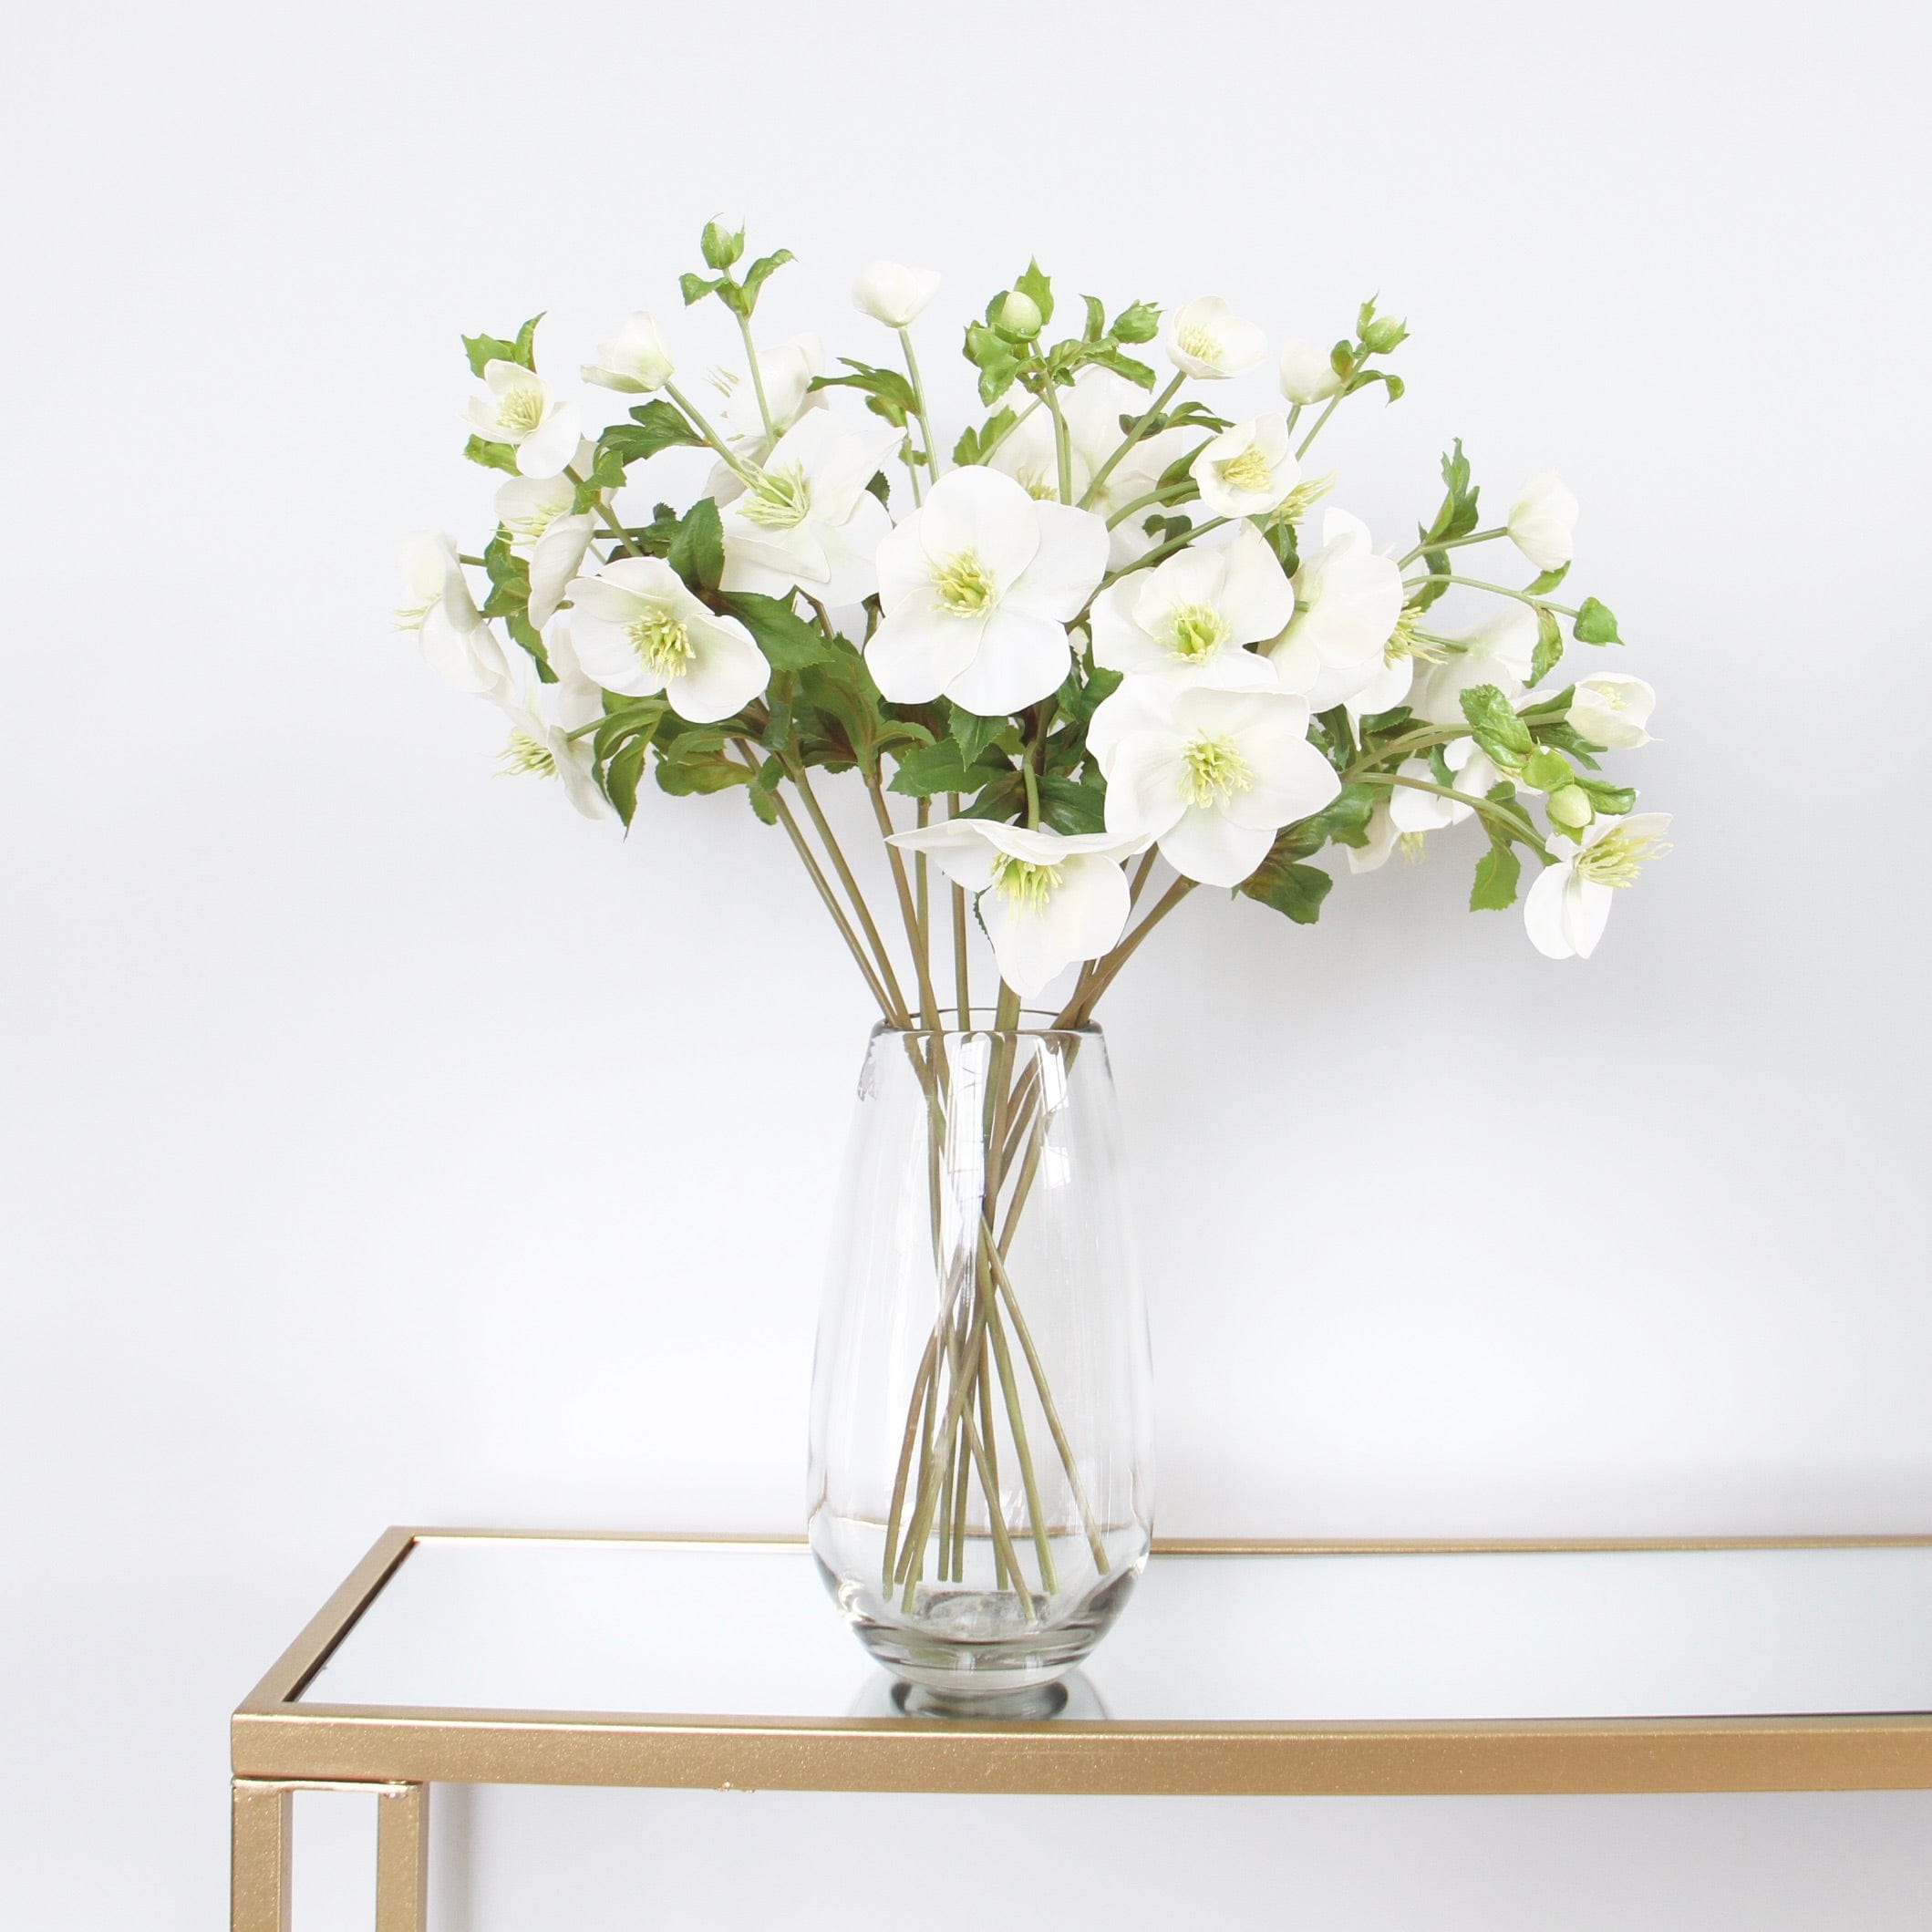 Artificial hellebore the finest white faux hellebore and also known as the artificial Christmas rose, luxury silk flowers realistic faux flowers from Amaranthine Blooms UK